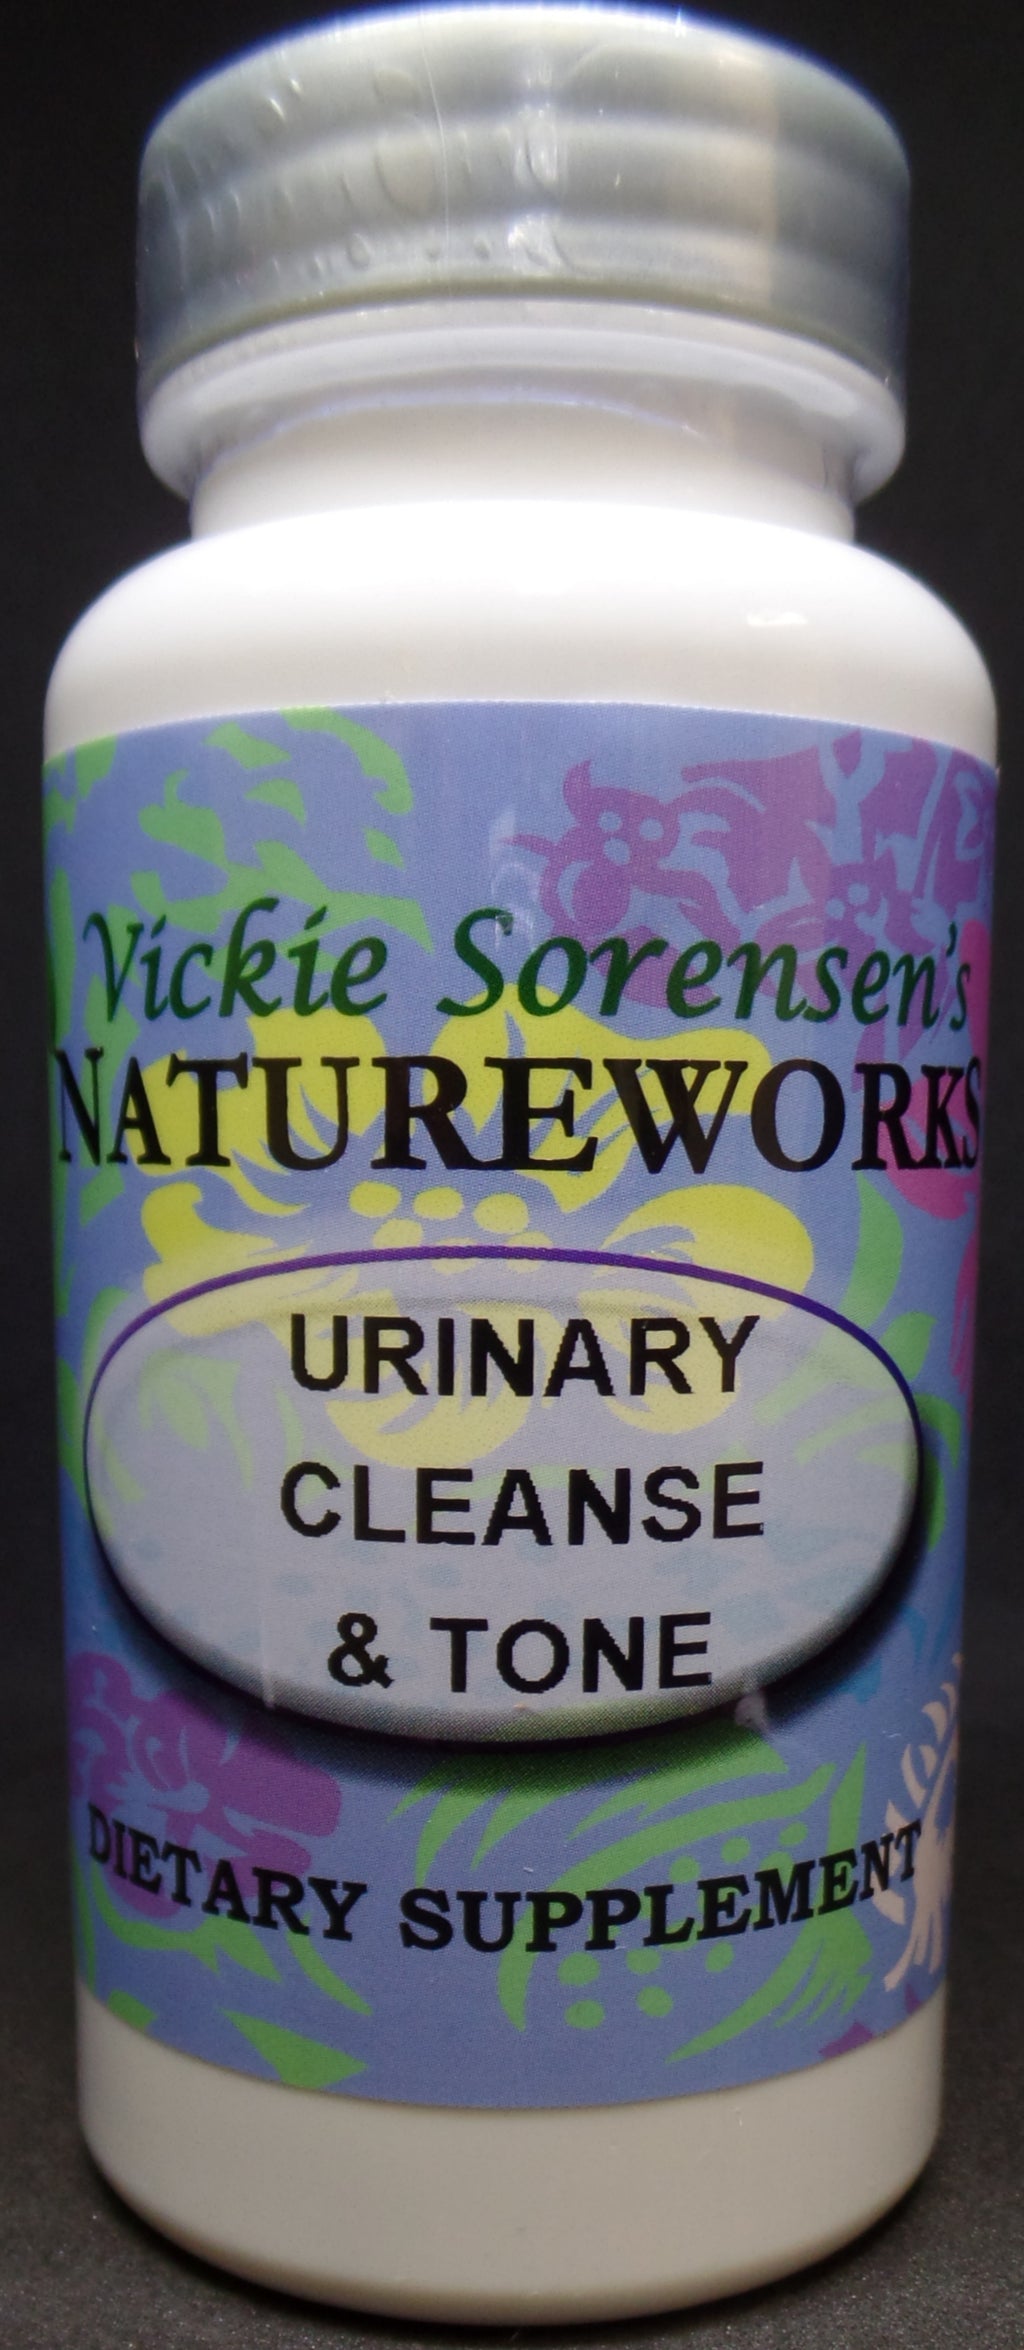 Urinary Cleanse & Tone